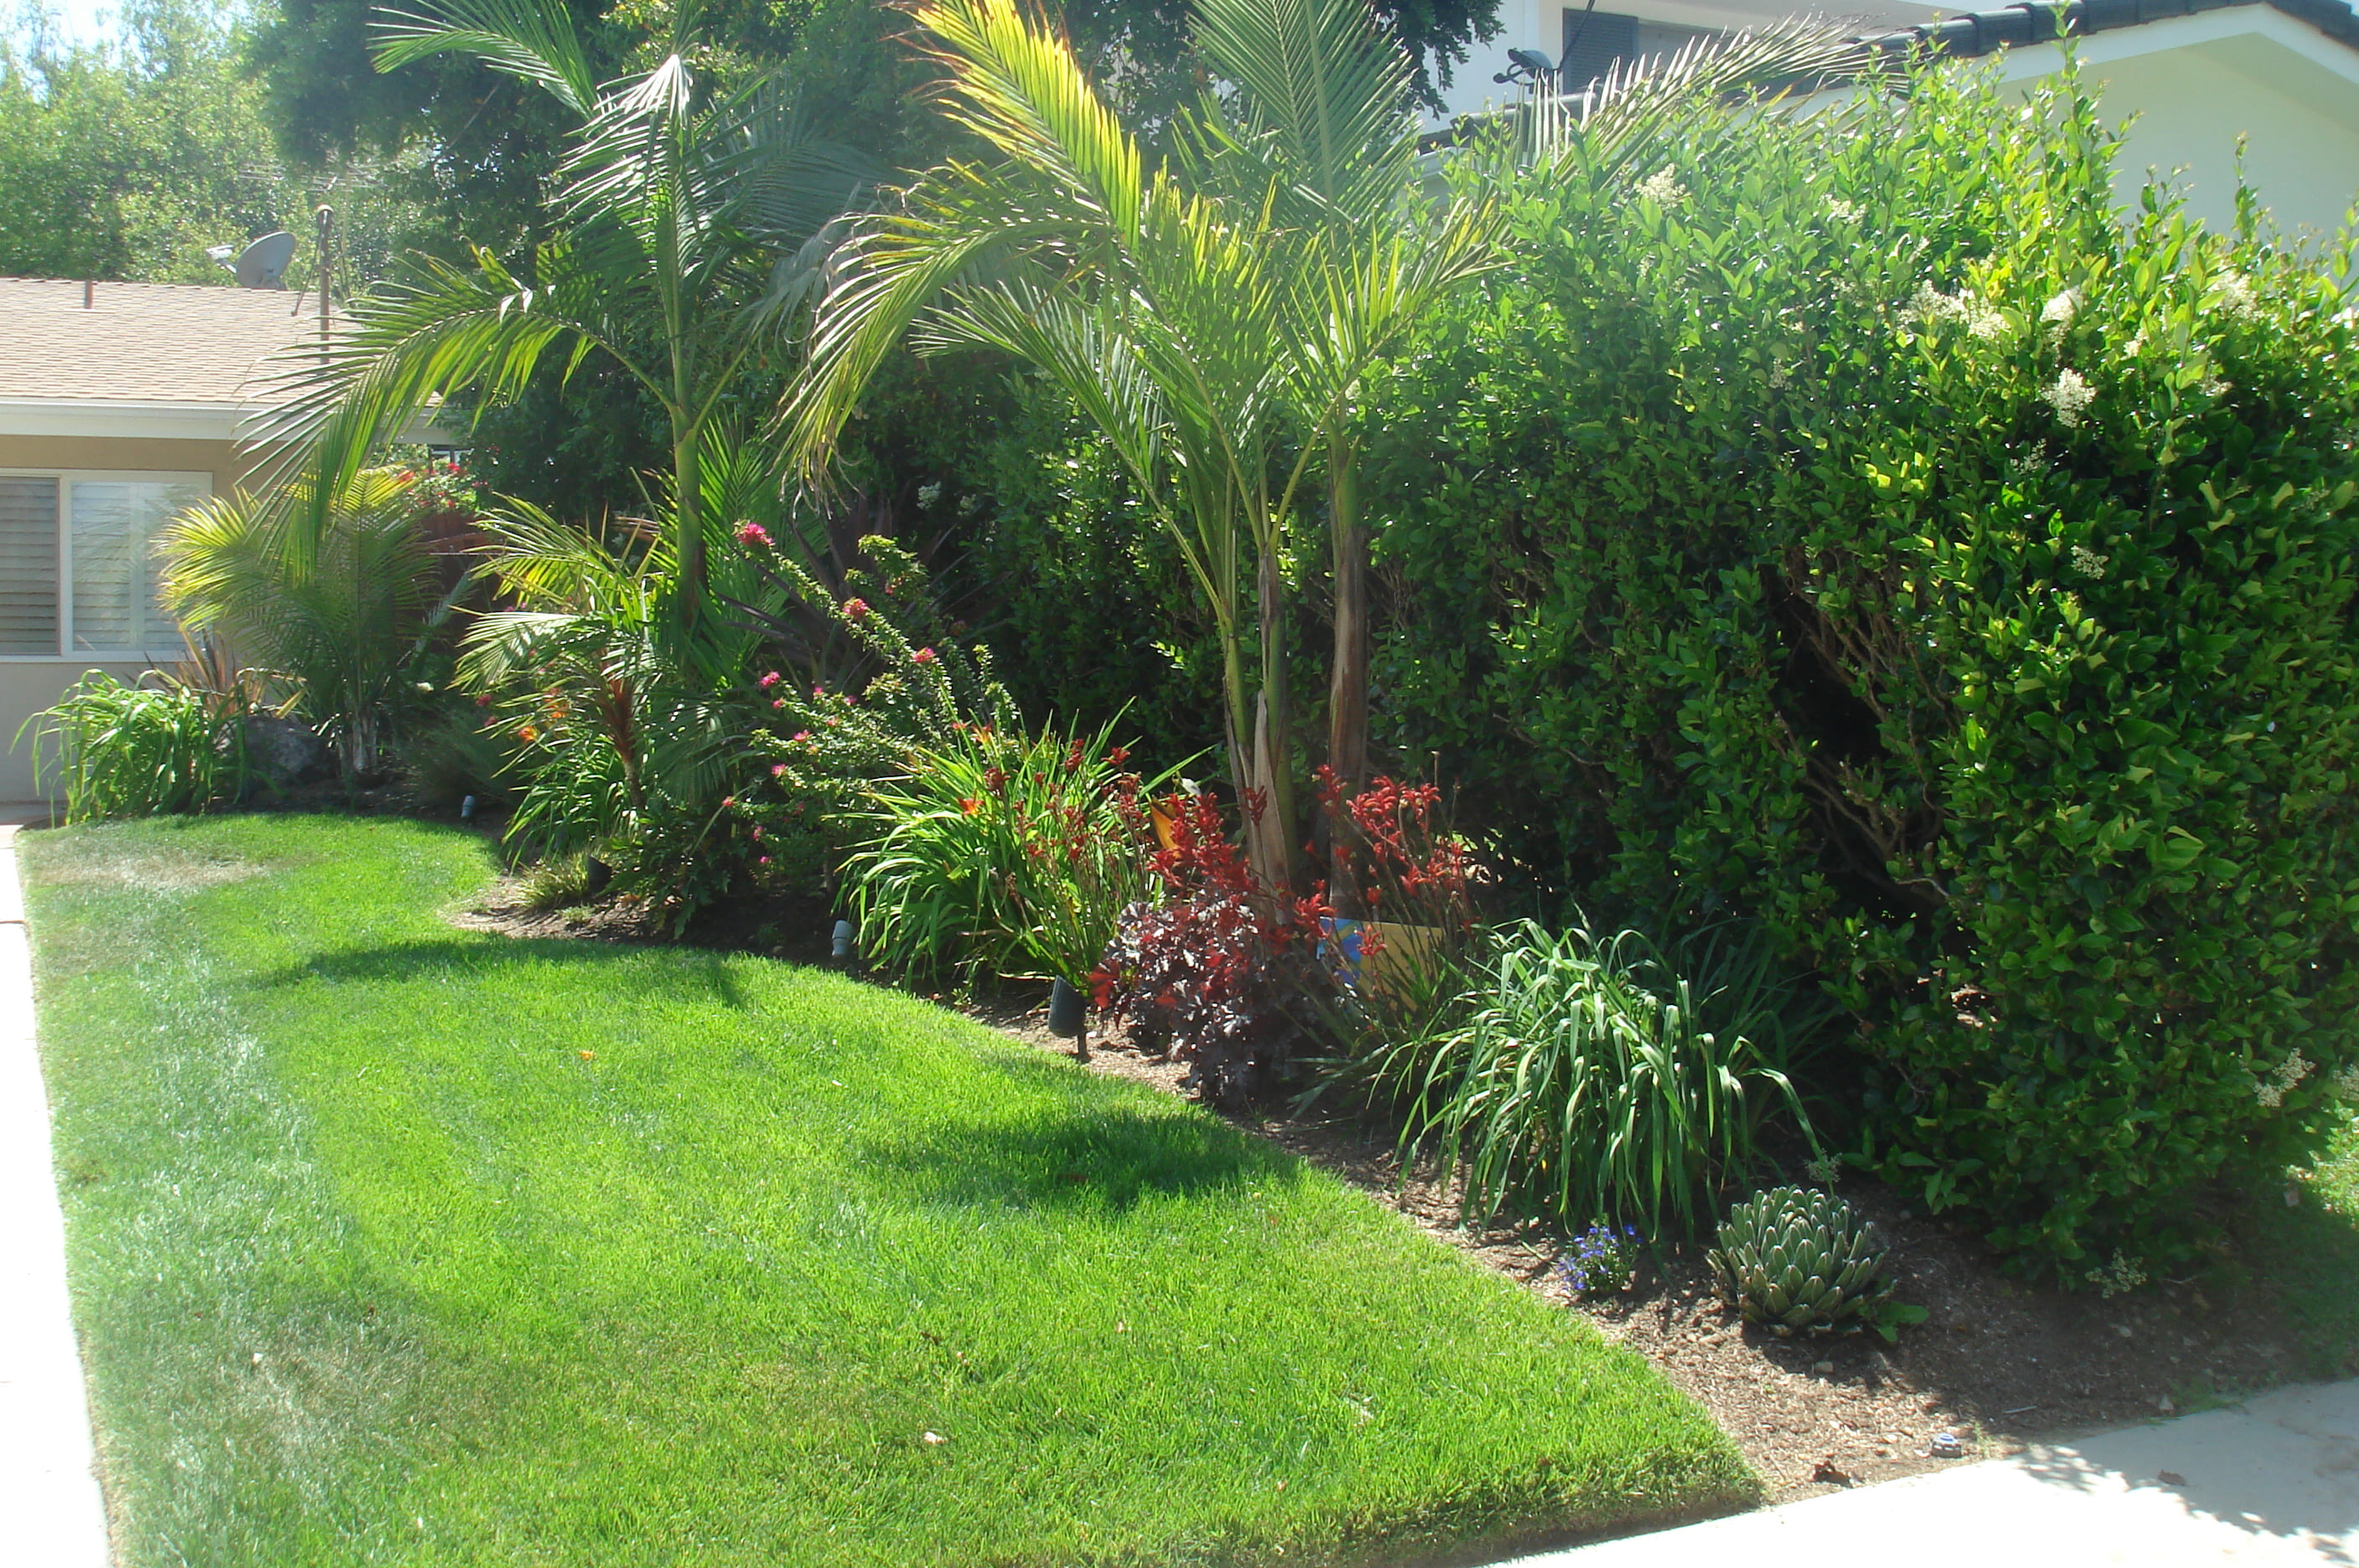 22.SIMPHOME.COM tropical landscaping ideas for front yard small backyard landscape